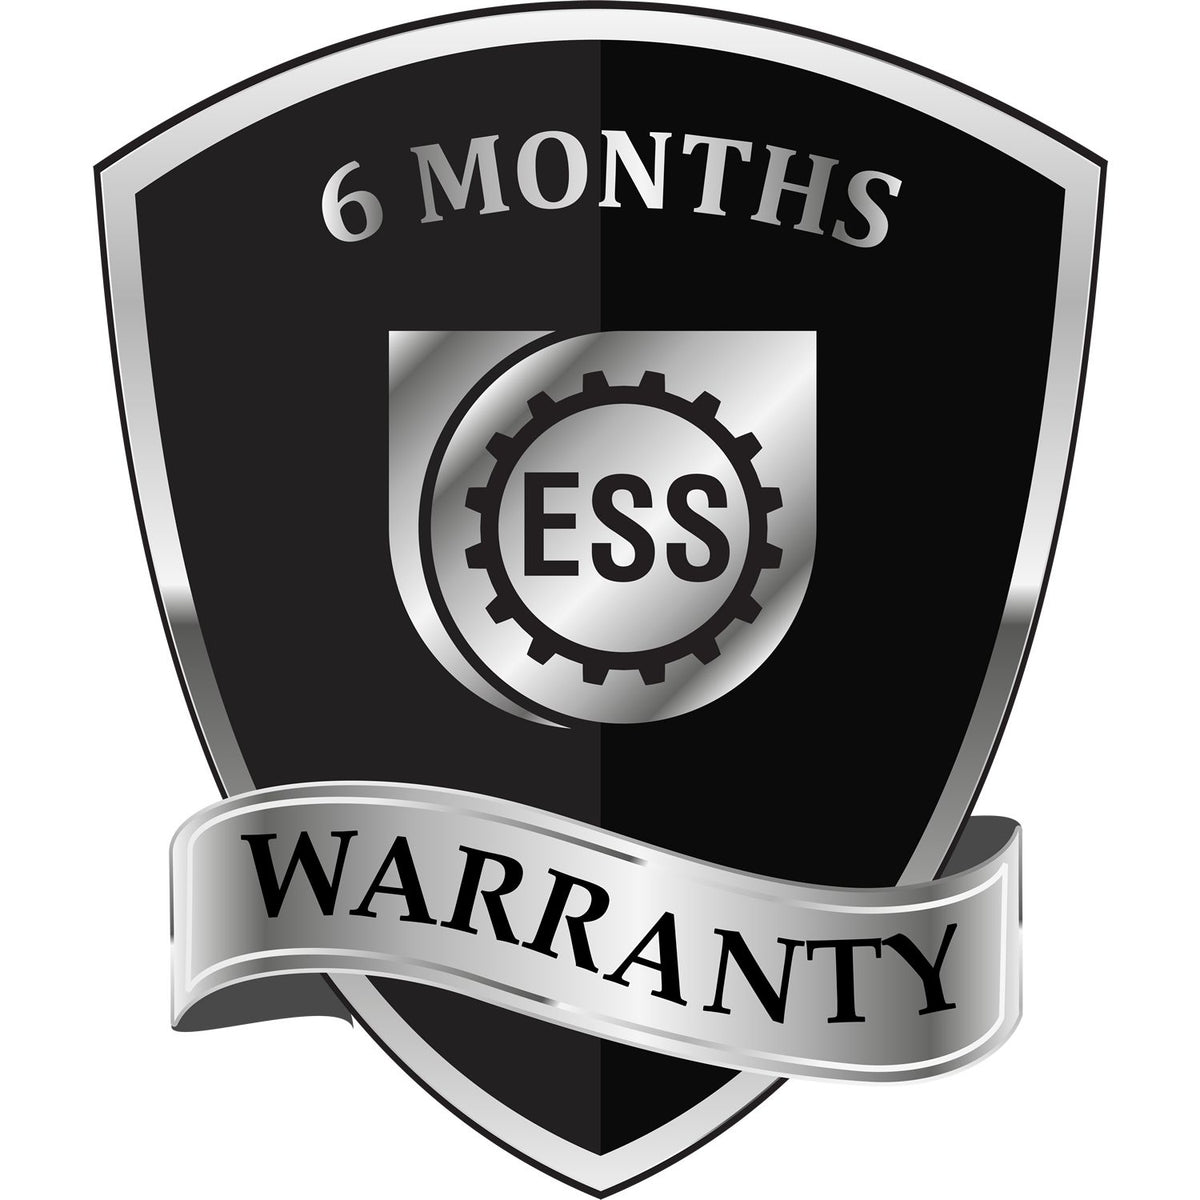 A badge or emblem showing a warranty icon for the PSI Kansas Notary Stamp